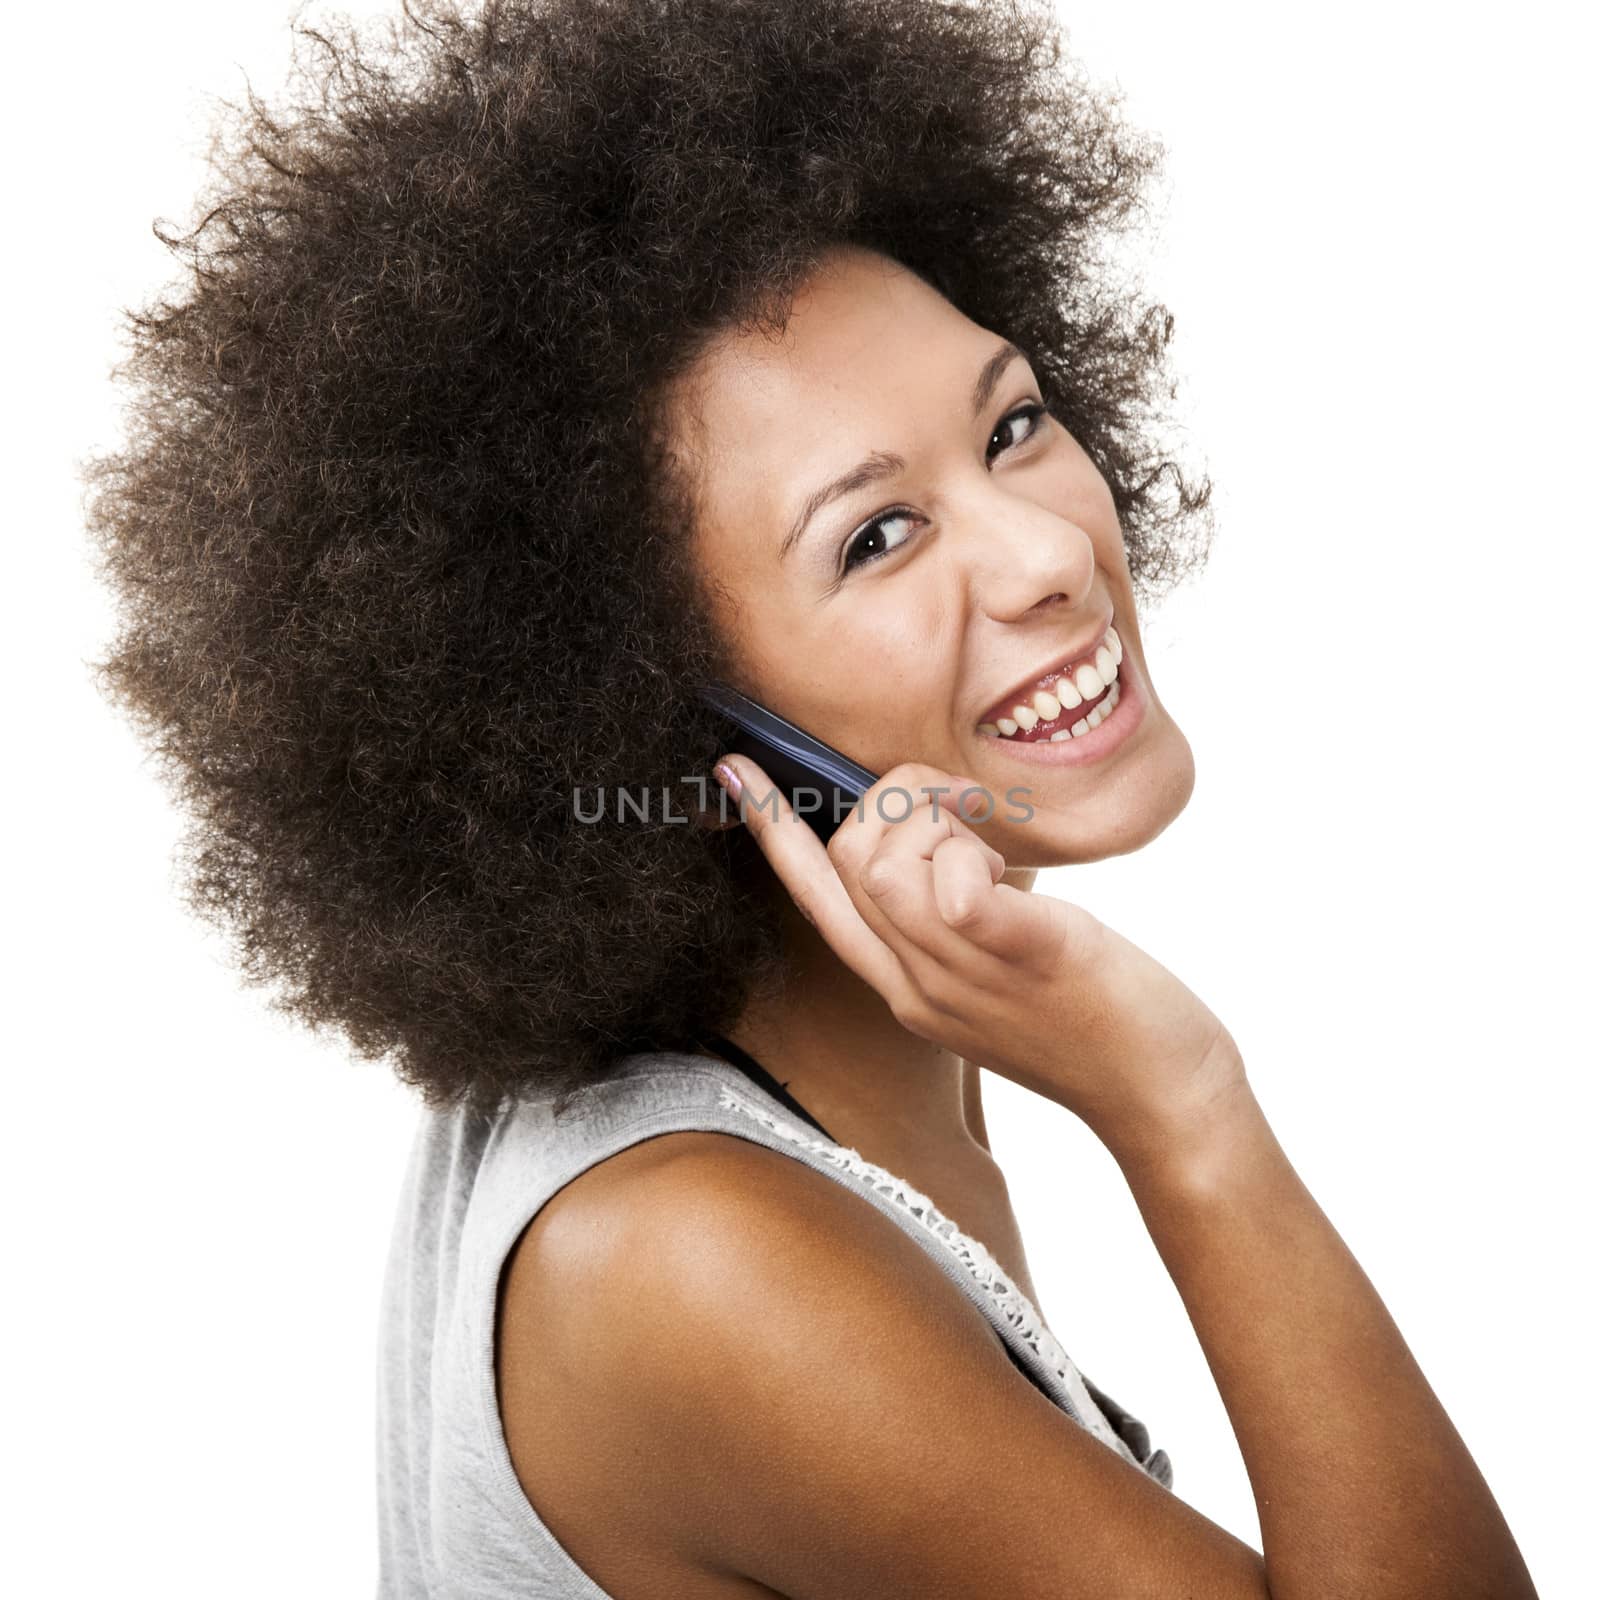 Beautiful woman at cellphone by Iko